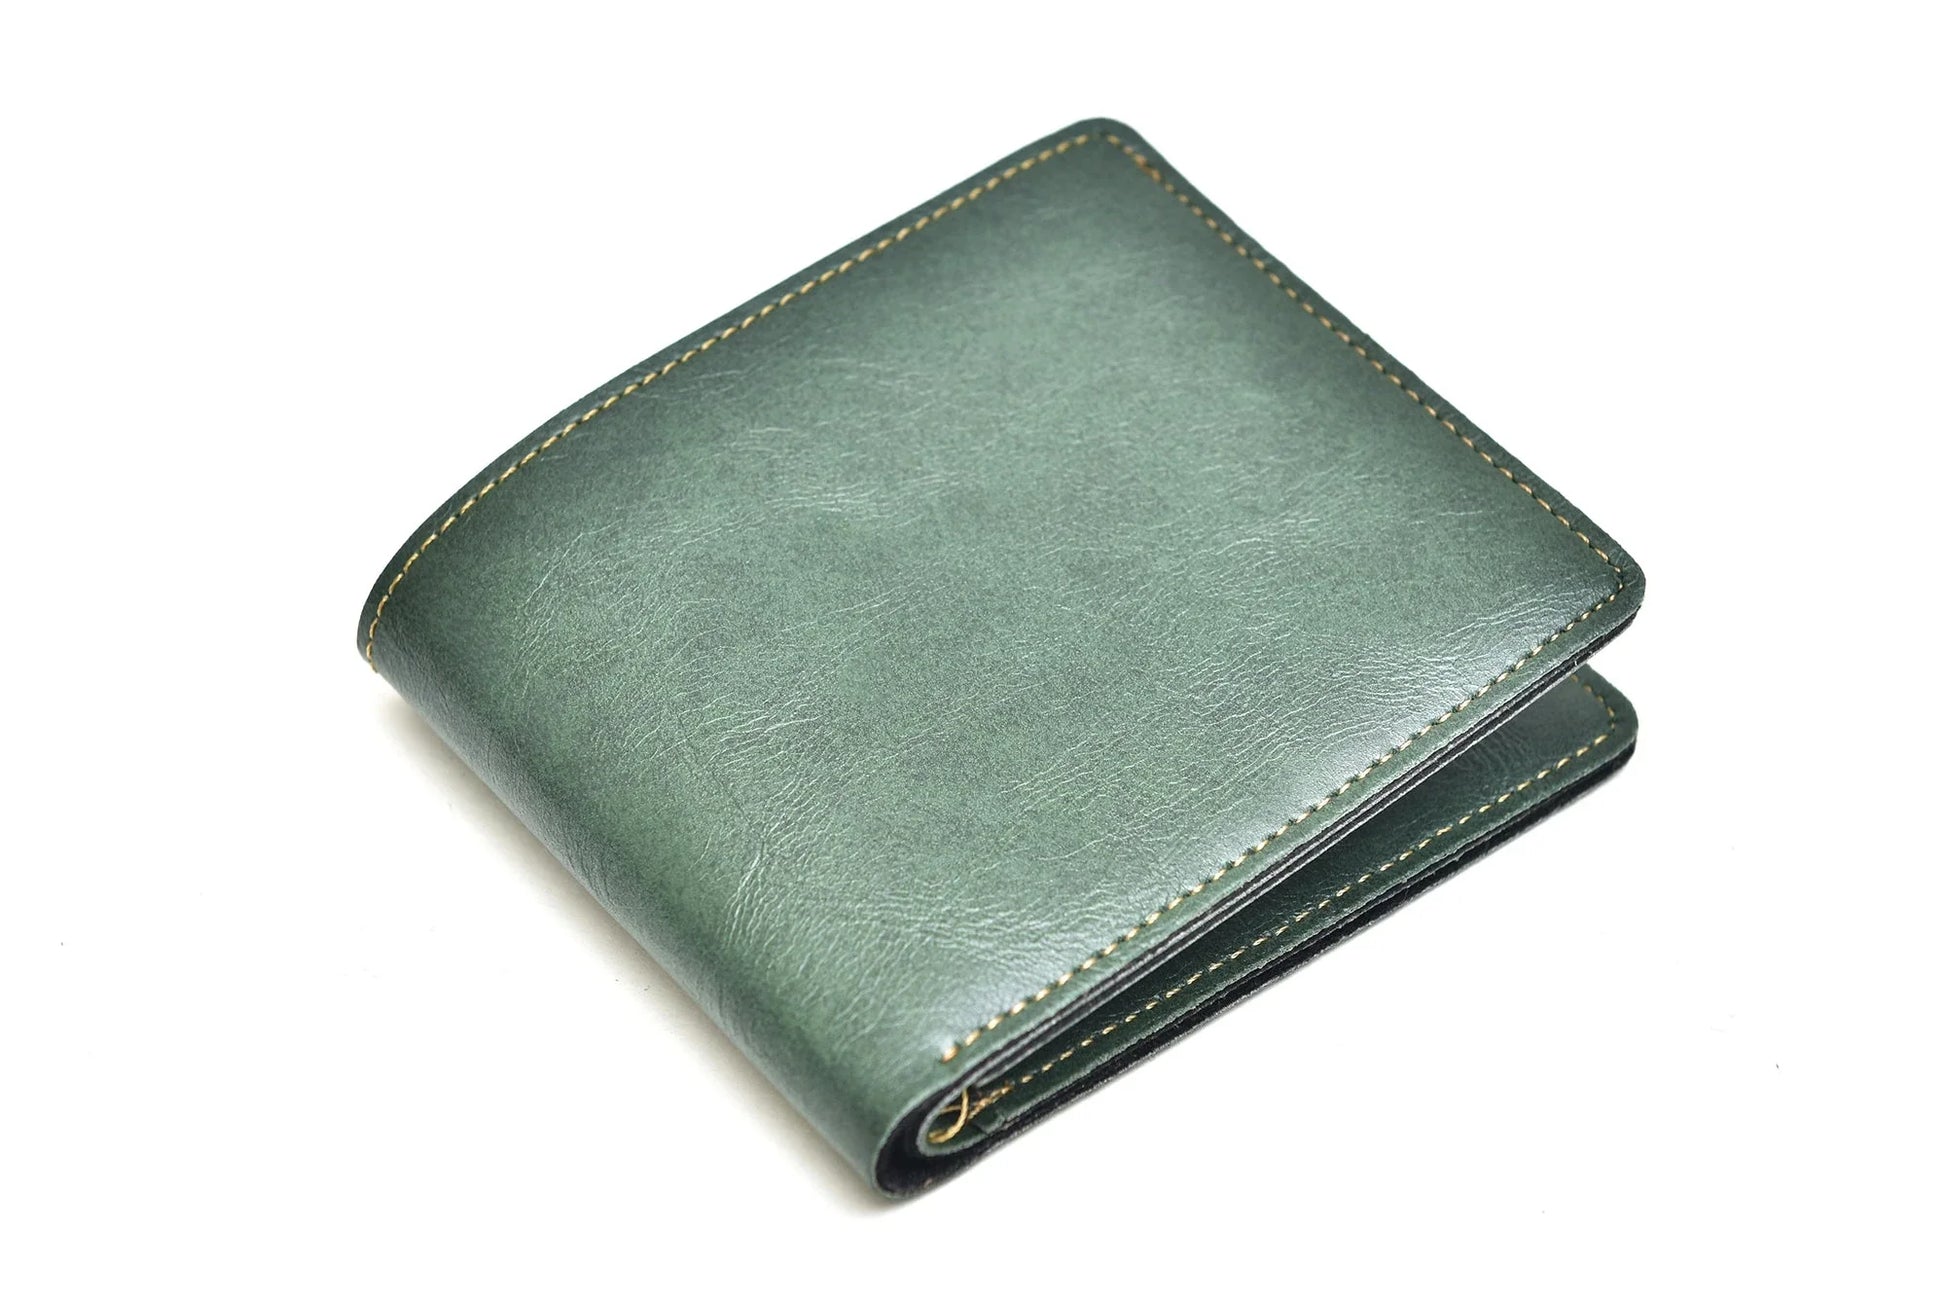 The sturdy build of this customised leather wallet ensures total protection of your belongings!